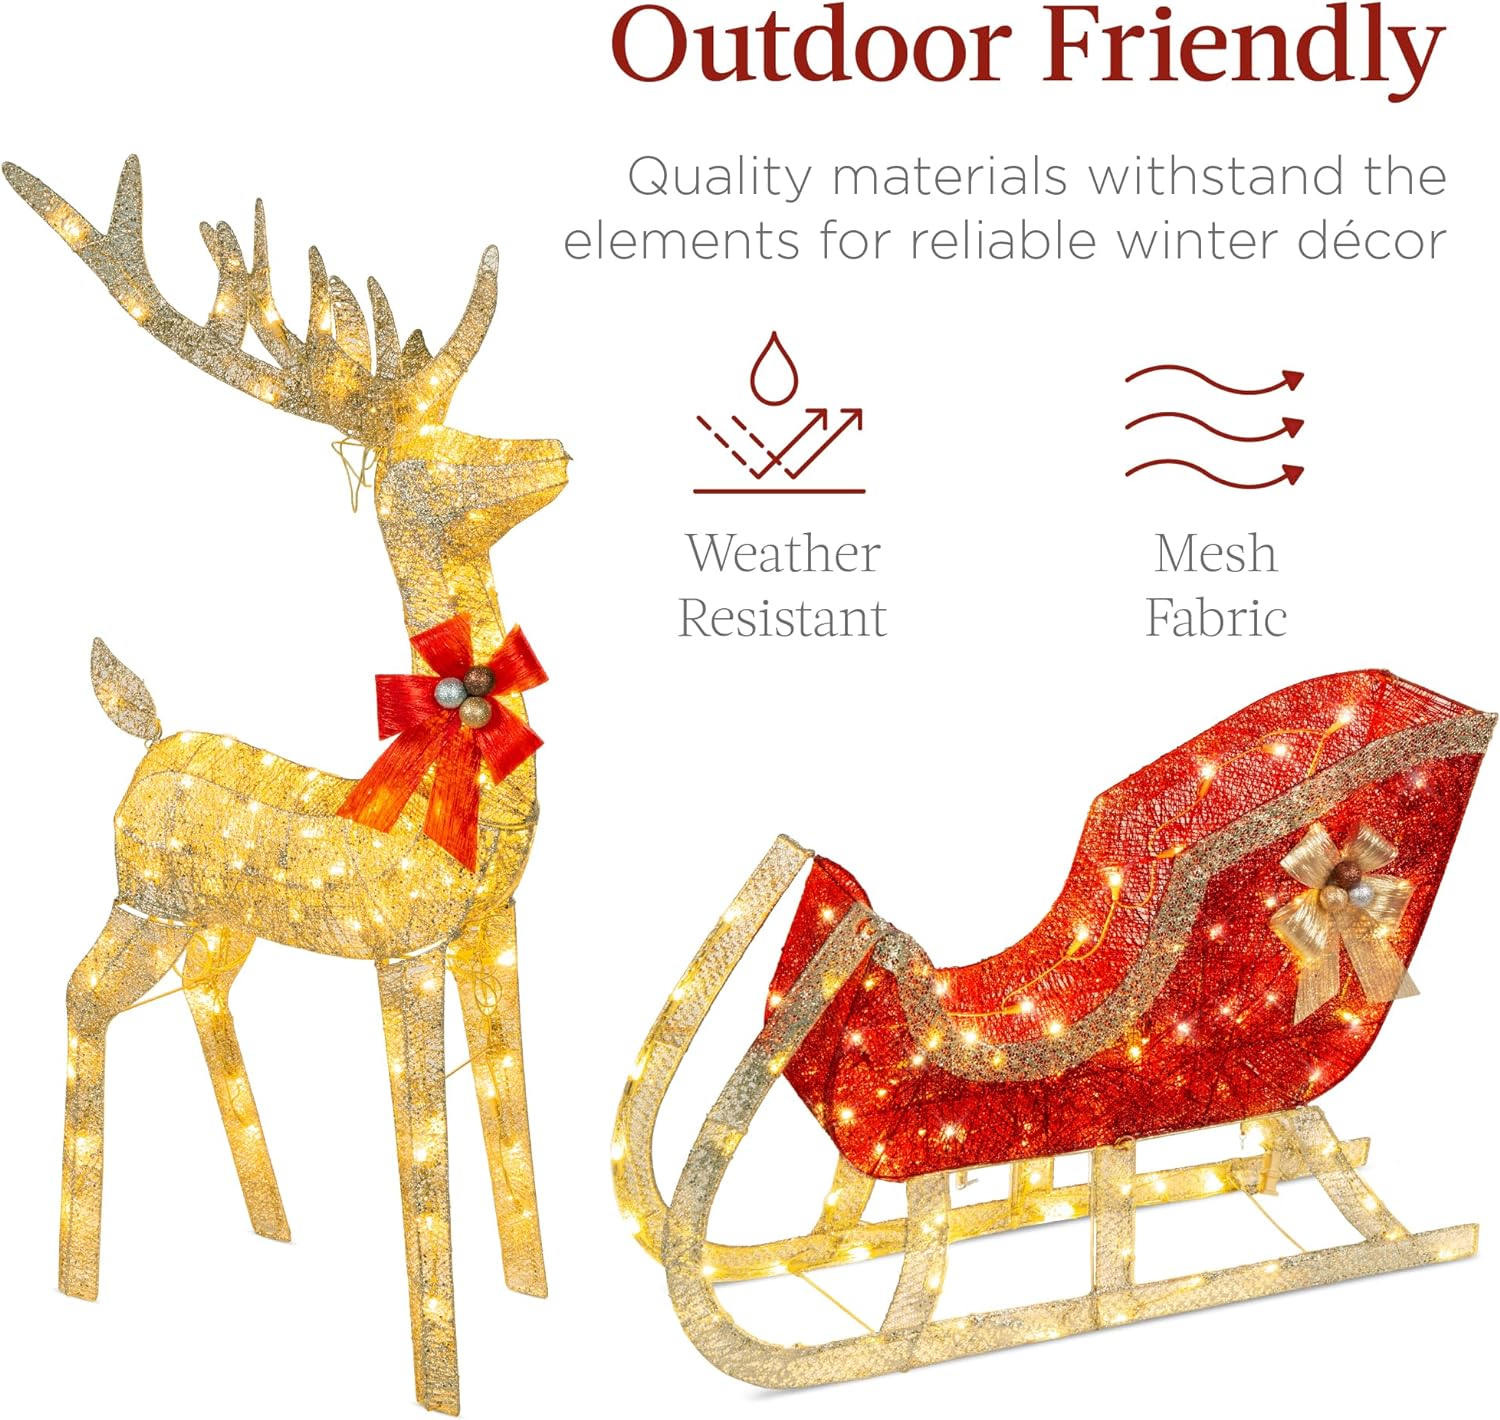 Best Choice Products Lighted Christmas 4ft Reindeer & Sleigh Outdoor Yard Decoration Set w/ 205 LED Lights, Stakes - Gold - image 5 of 7